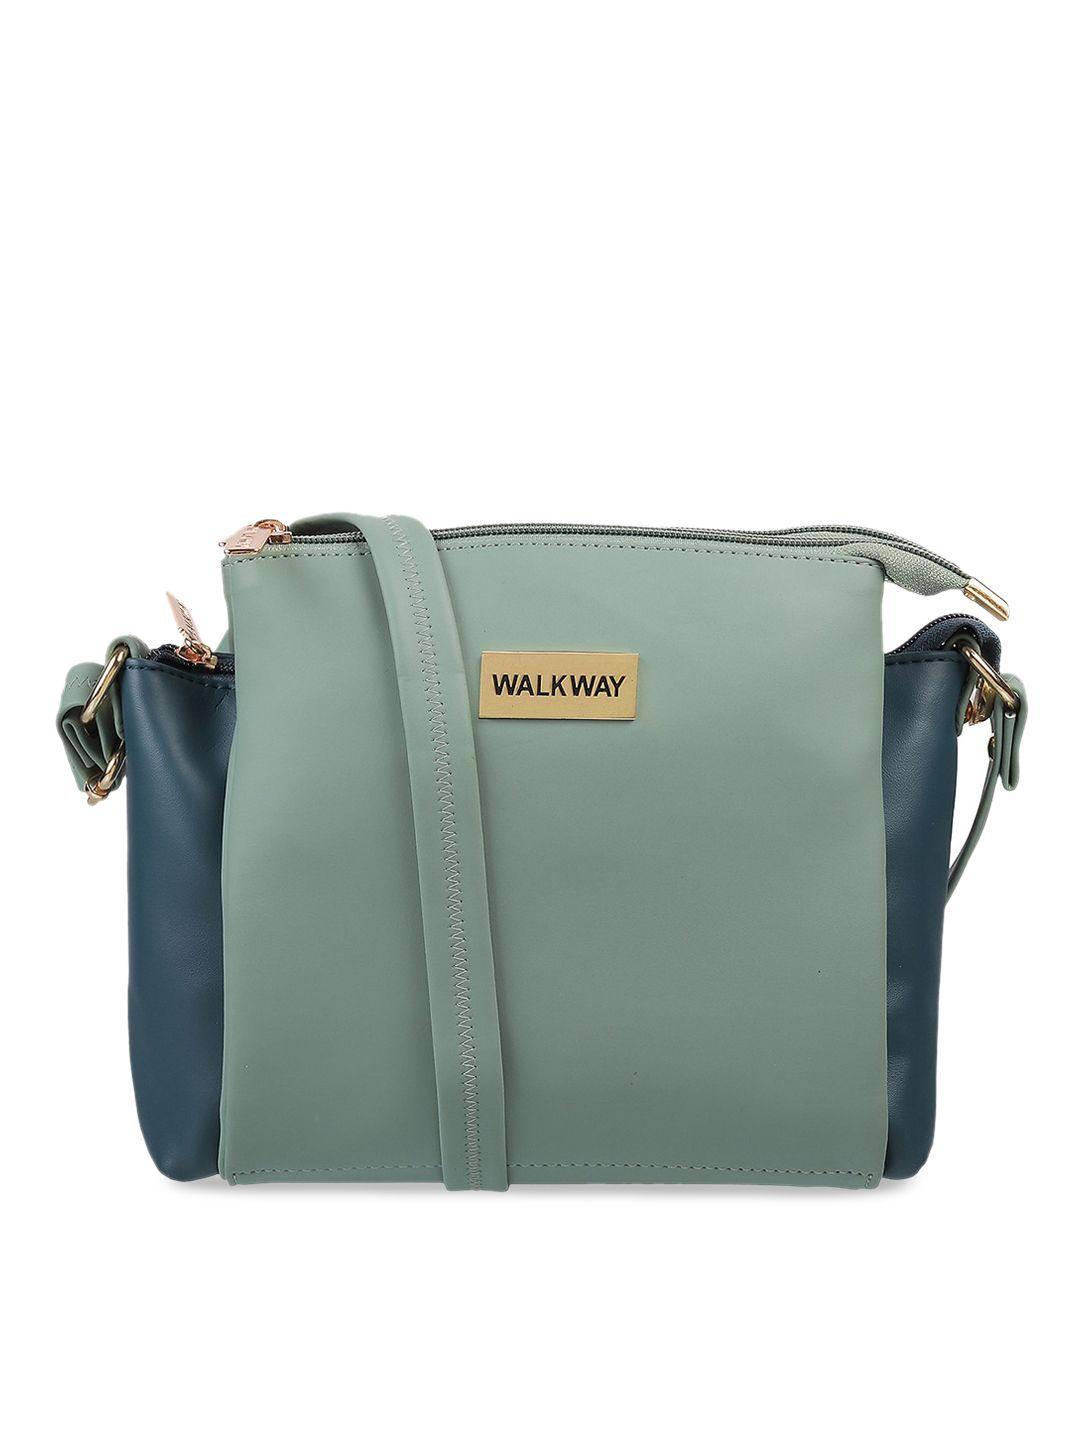 walkway by metro green colourblocked structured sling bag with tasselled